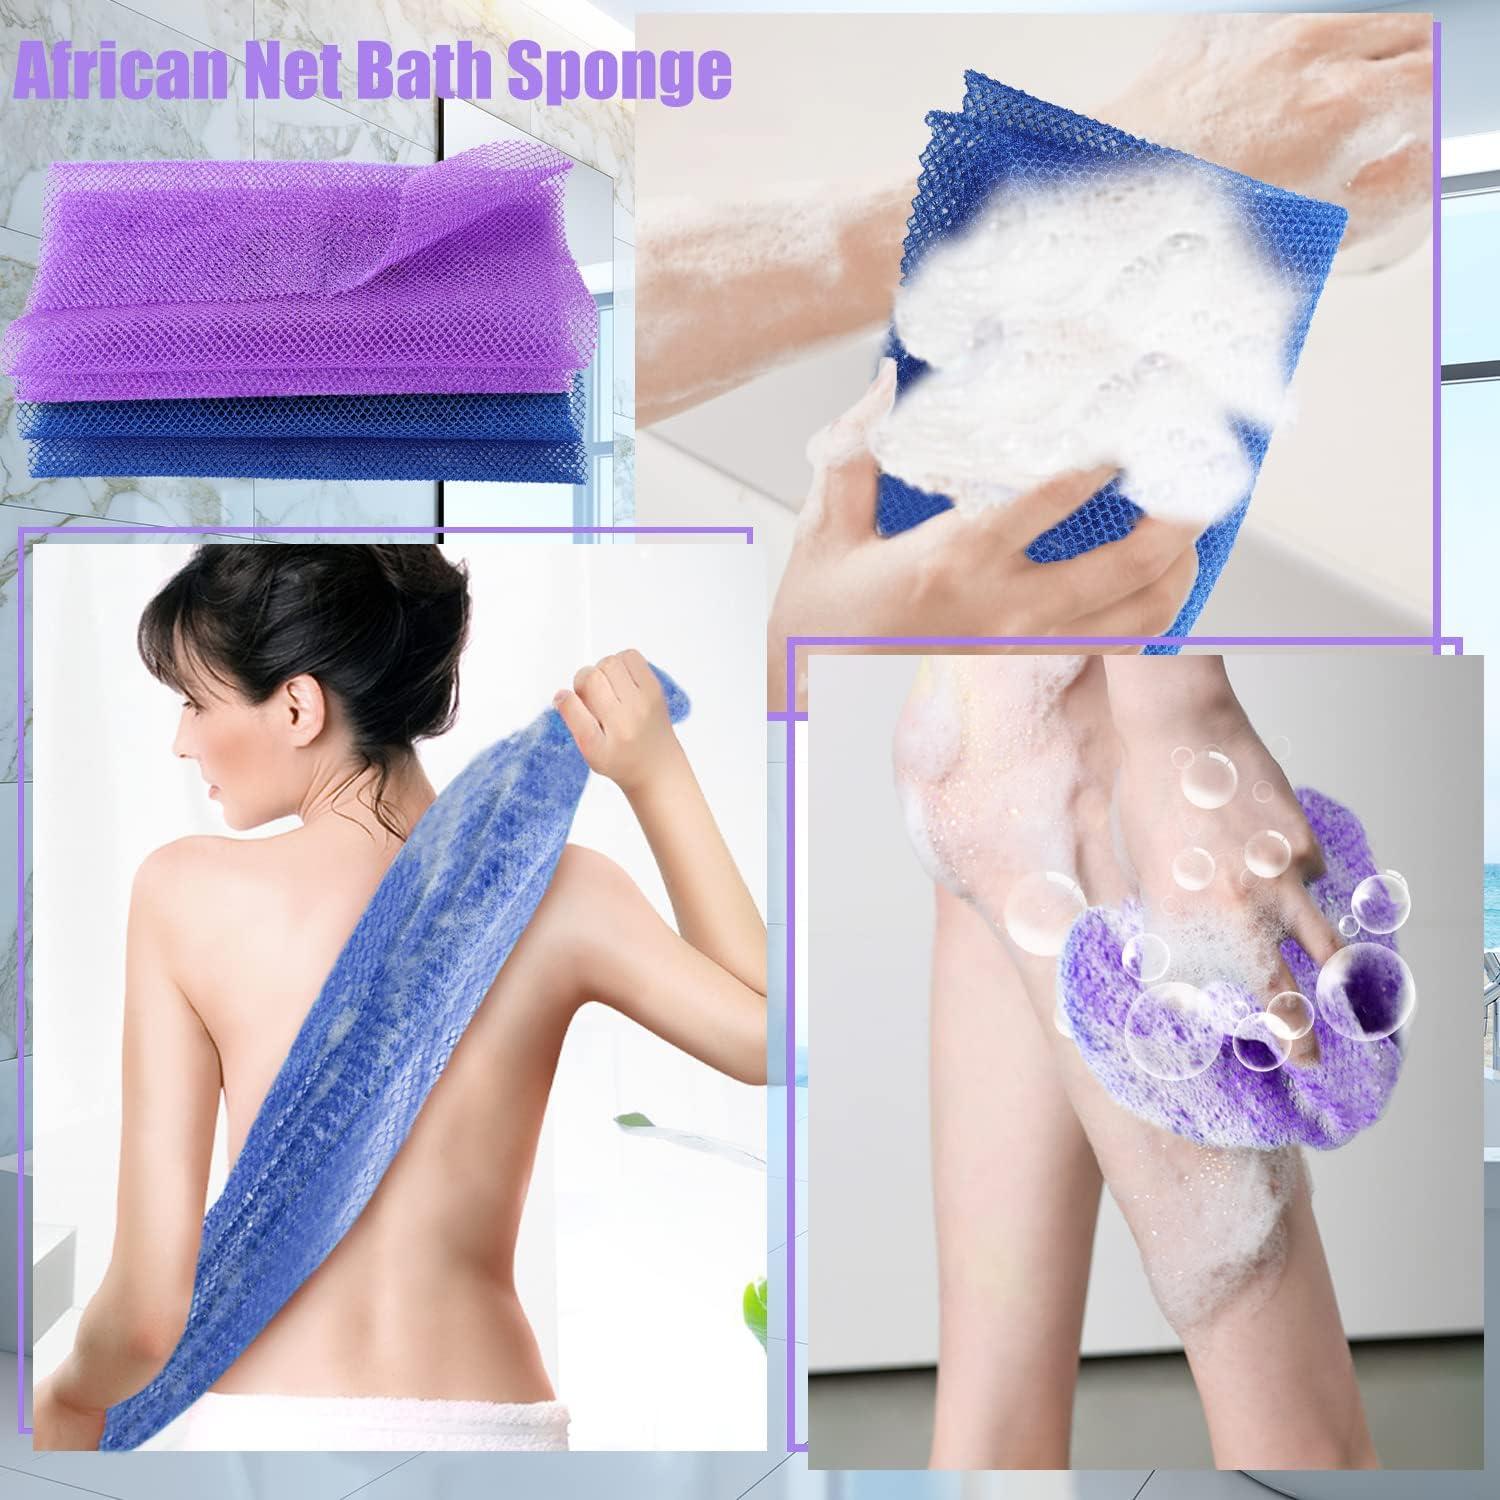 2 Pcs African Net Sponge, African Exfoliating Net Bath Sponge Body Scrubber  Net Washcloth Back Scrubber Skin Smoother for Daily Use (31.5x11.8 inches)  31.5*11.8 Inch Blue, Purple